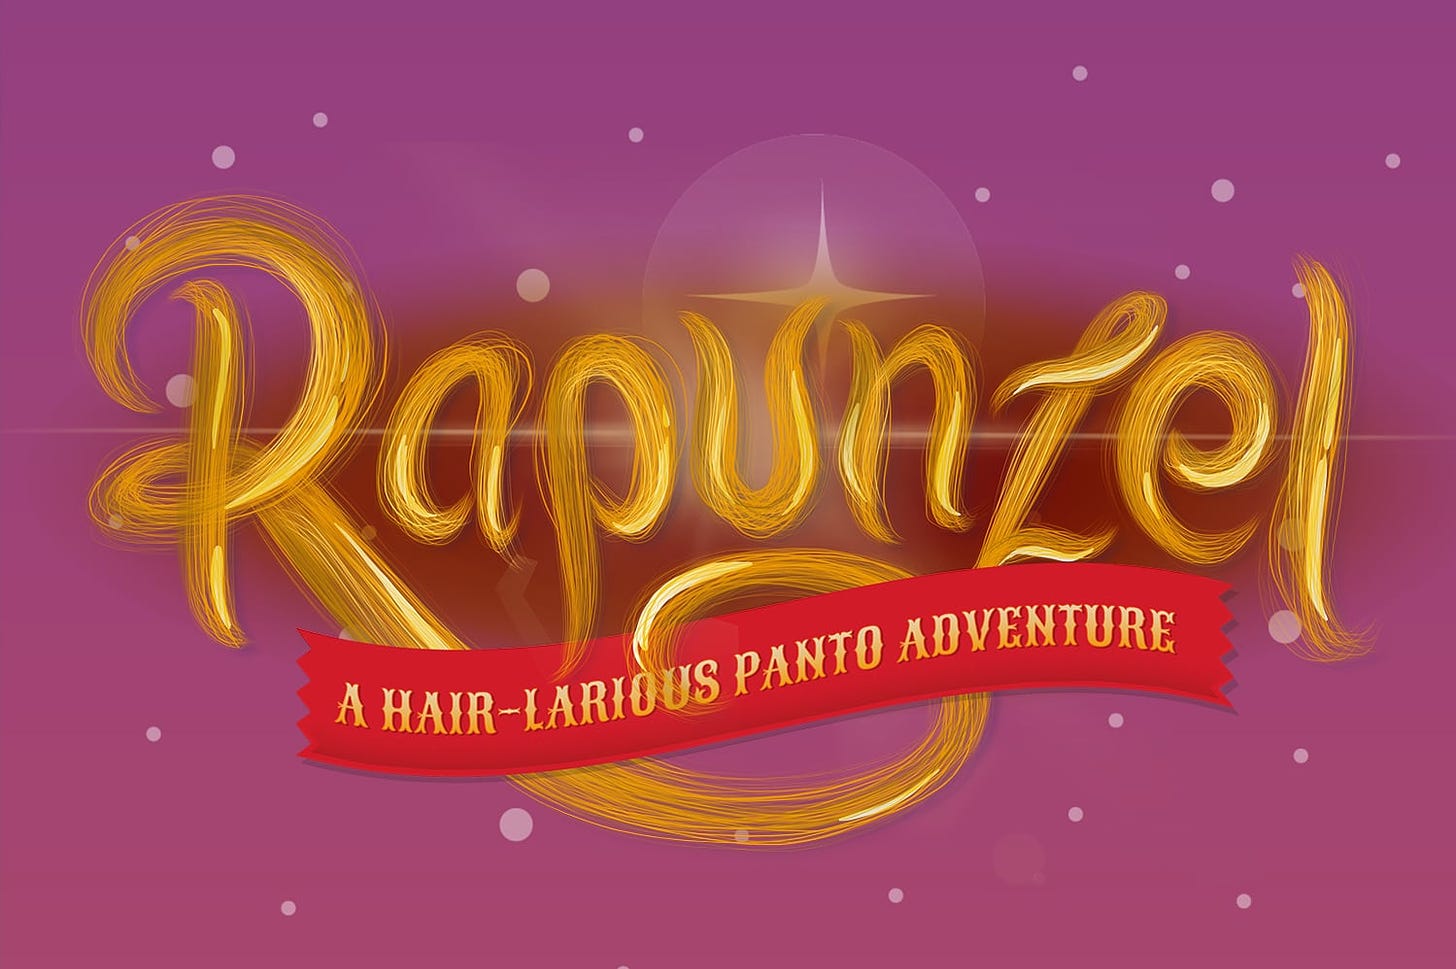 The image features an artistic title design that reads "Rapunzel," stylized to resemble long, flowing blonde hair, reflecting the character's most distinctive trait. The text is set against a purple background with subtle sparkles, creating a magical feel. A ribbon banner in a rich red hue flows through the lettering with the pun "A HAIR-LARIOUS PANTO ADVENTURE" written on it in white, adding a playful touch to the theme of the image. The overall design is whimsical and vibrant, hinting at a fun and comedic retelling of the classic fairy tale.